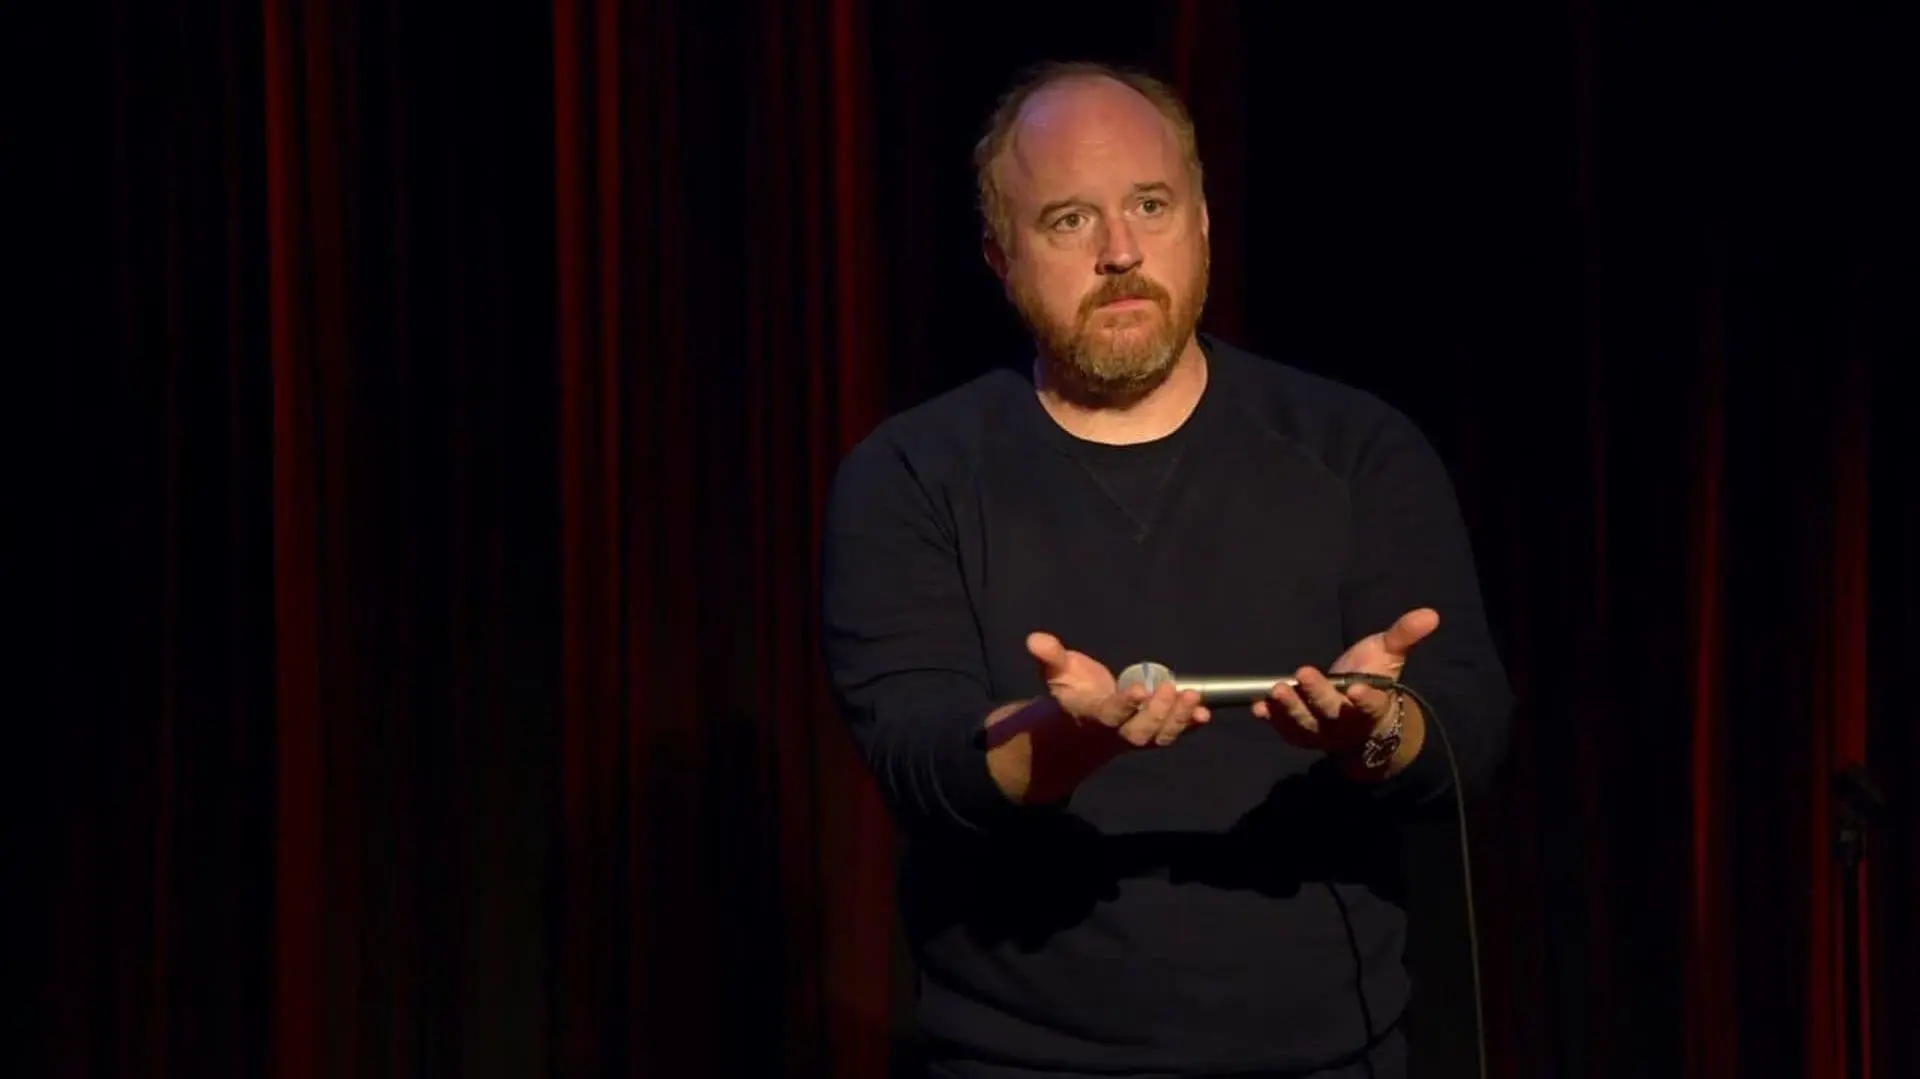 Louis C.K.: Live at the Comedy Store_peliplat